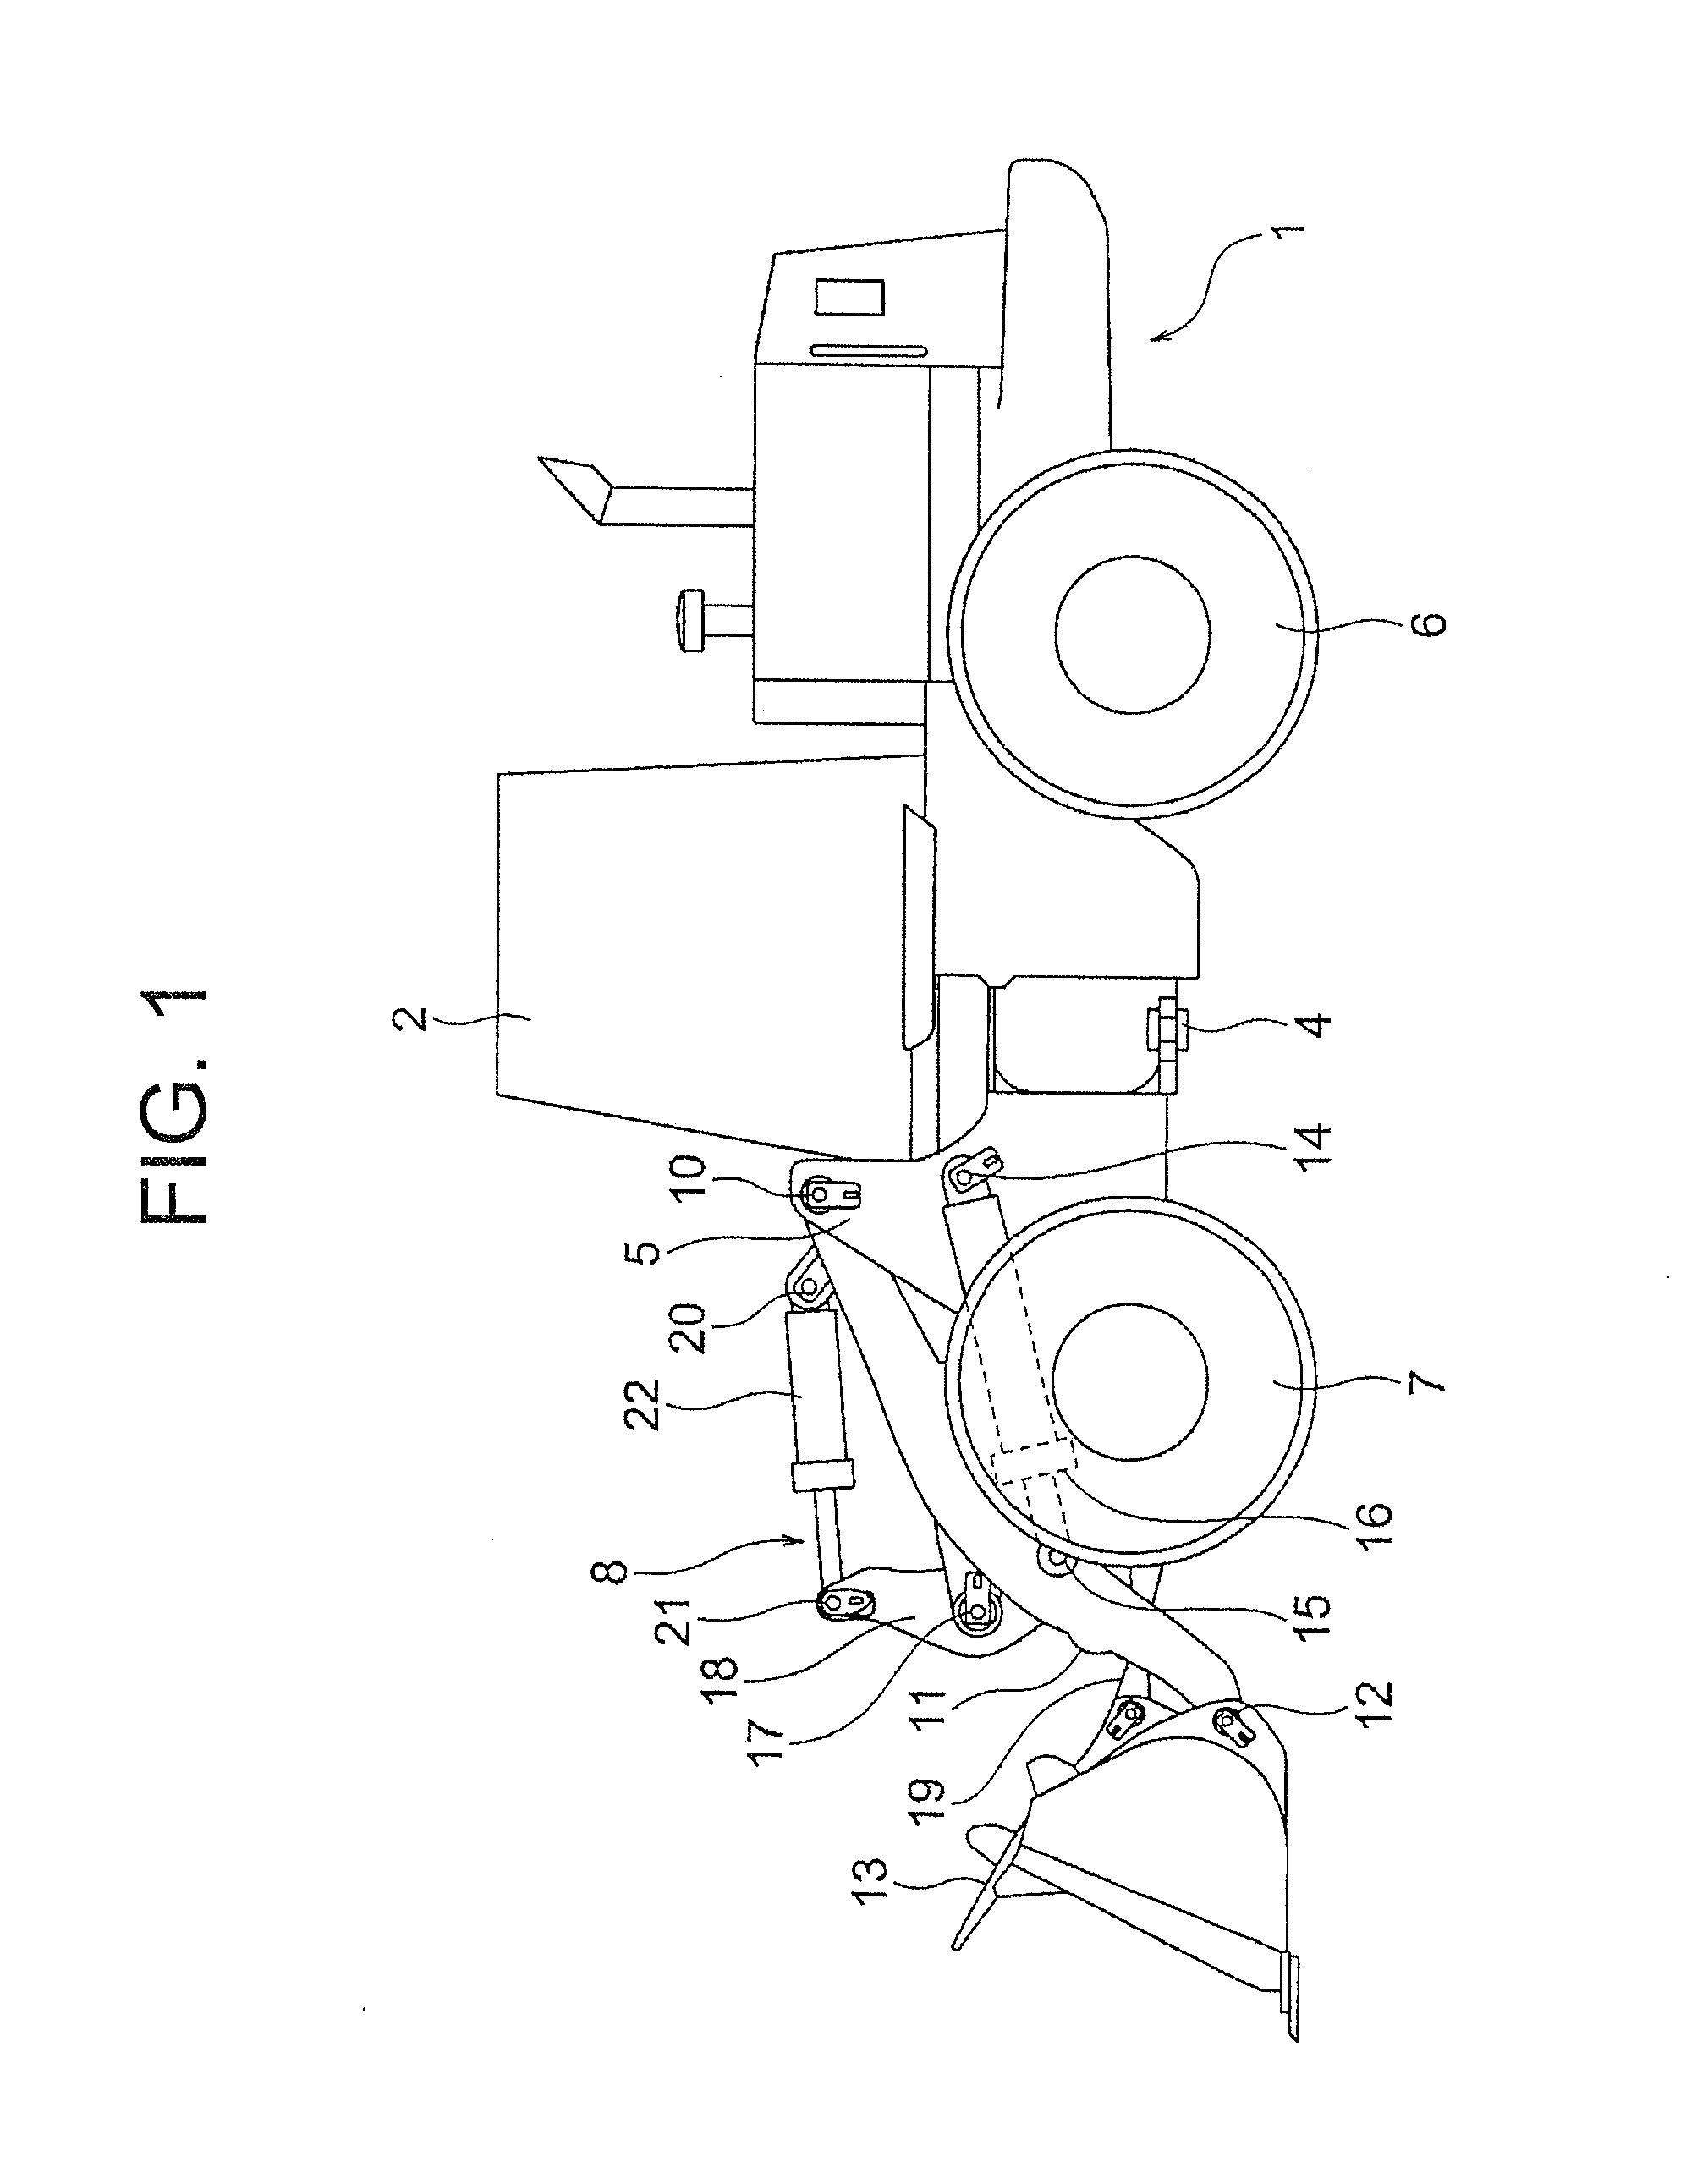 Drive Control Device for Work Vehicle